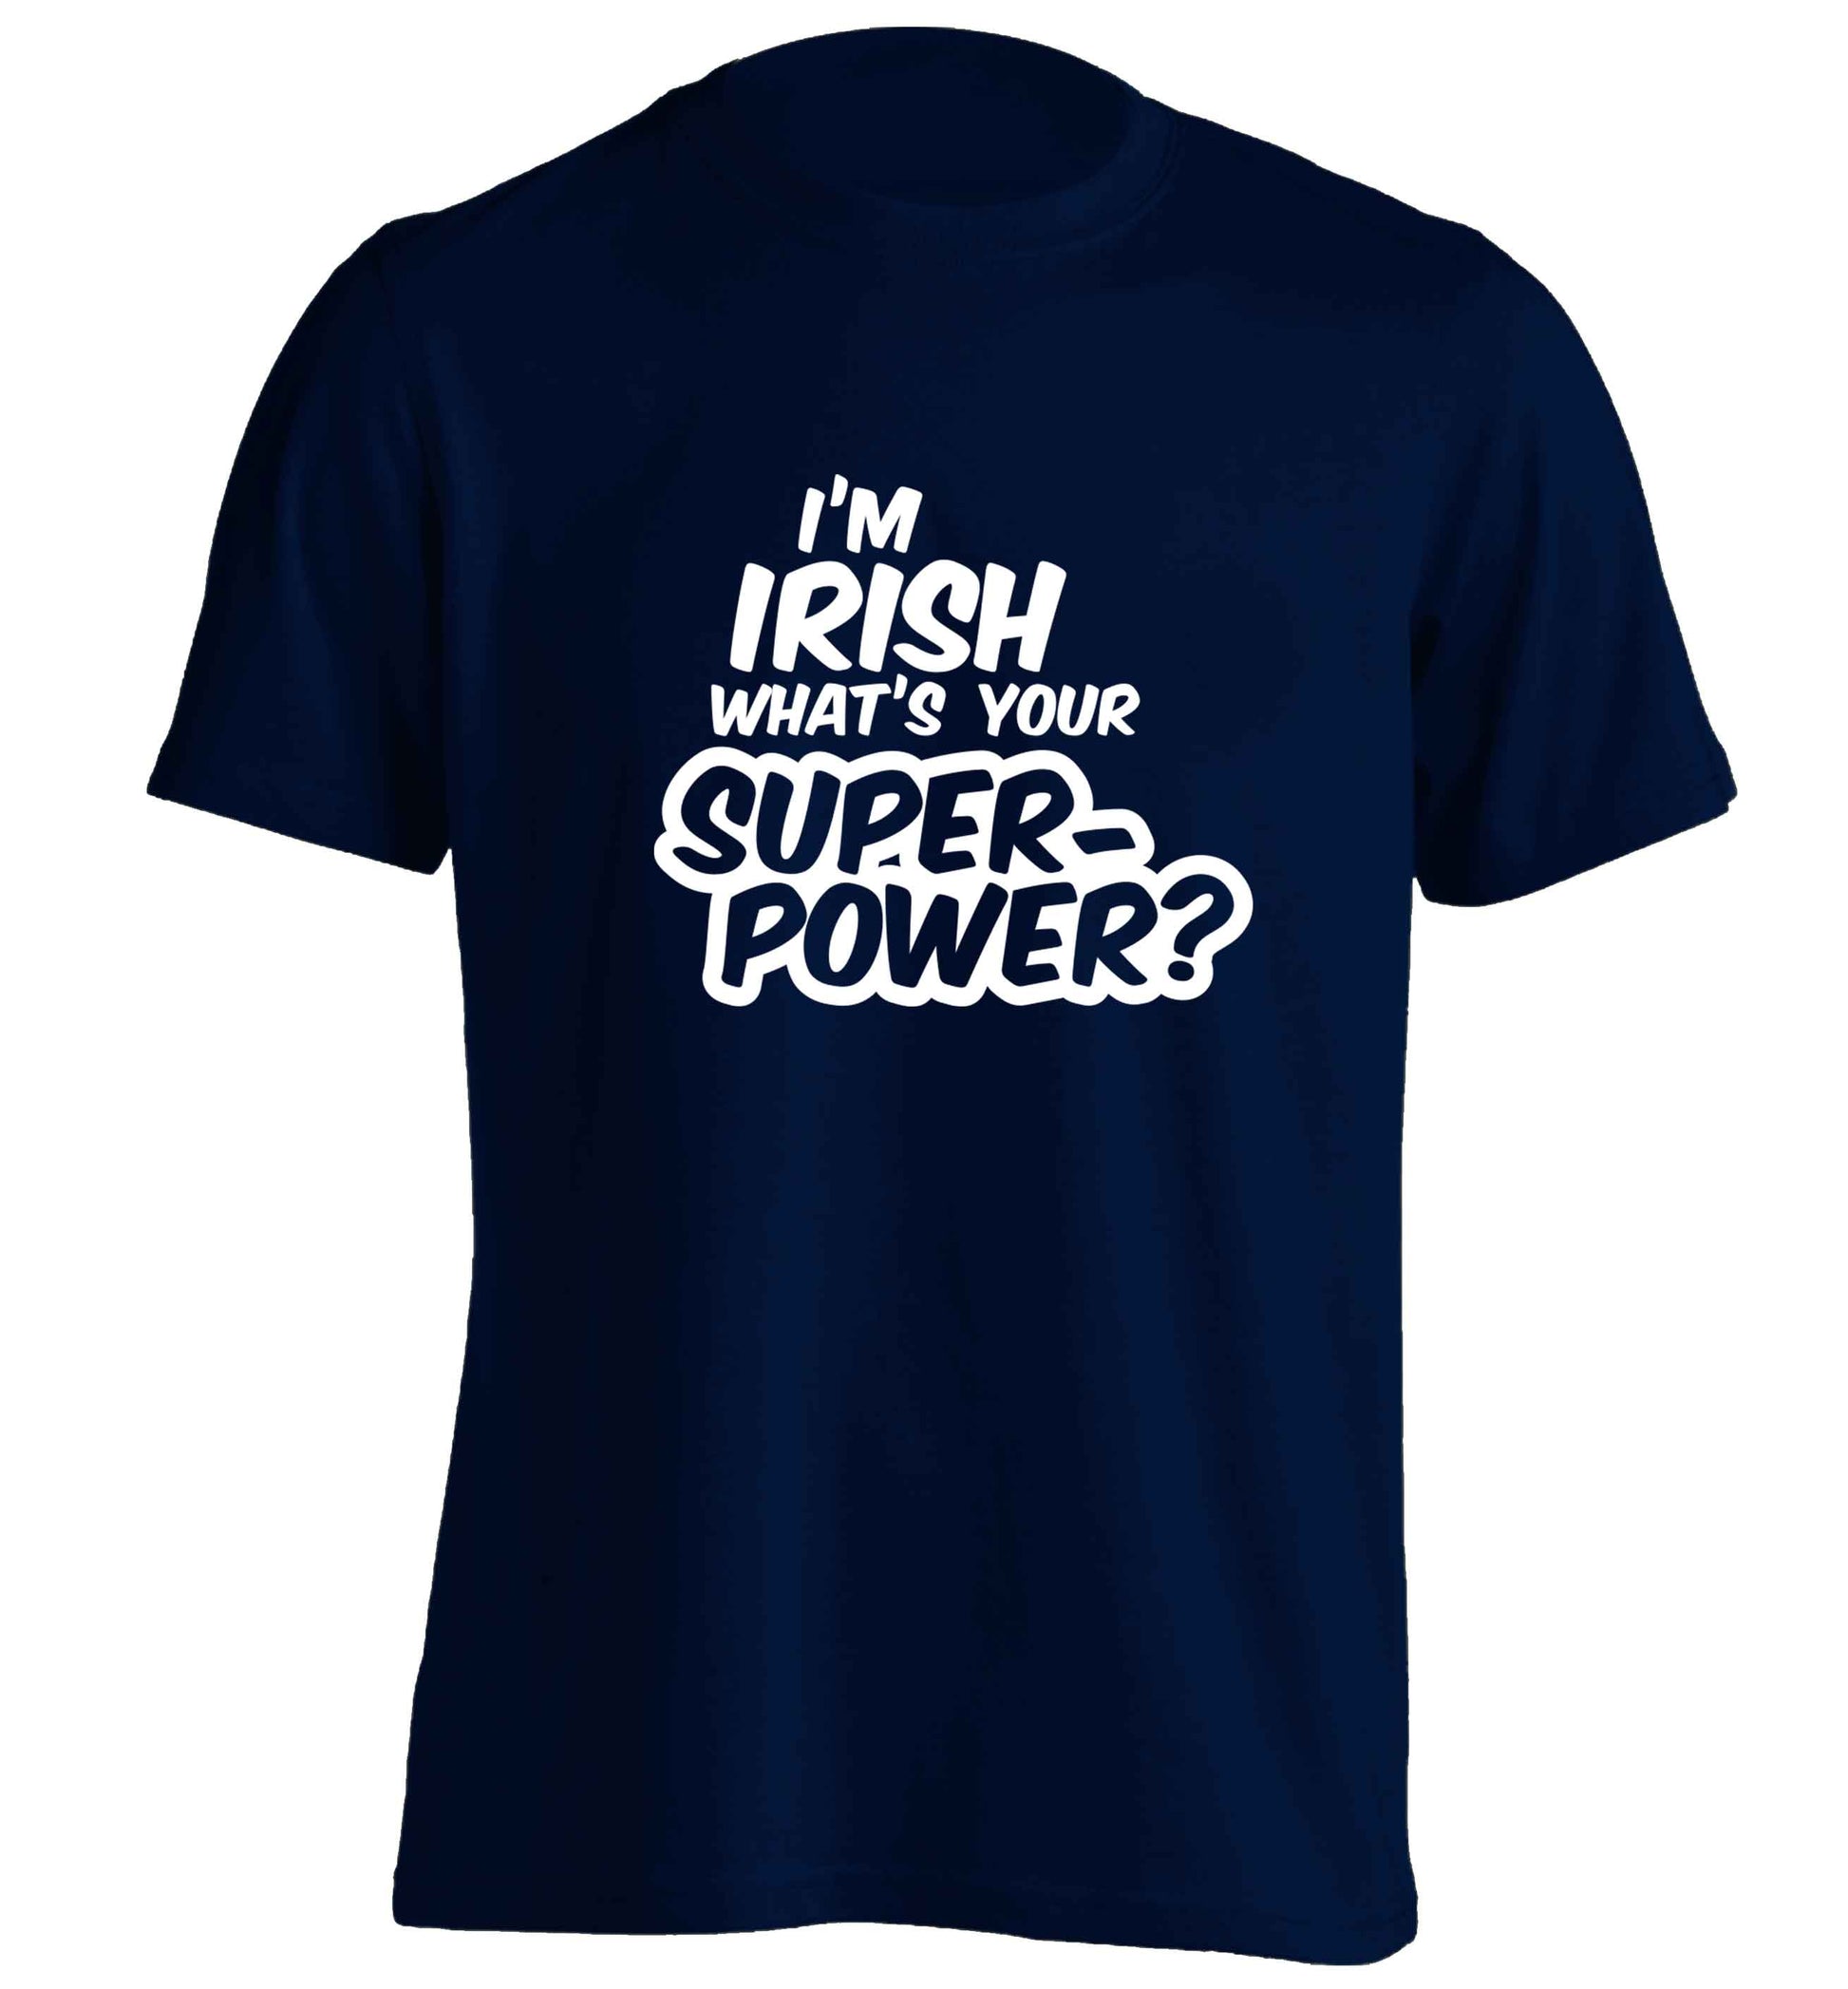 I'm Irish what's your superpower? adults unisex navy Tshirt 2XL